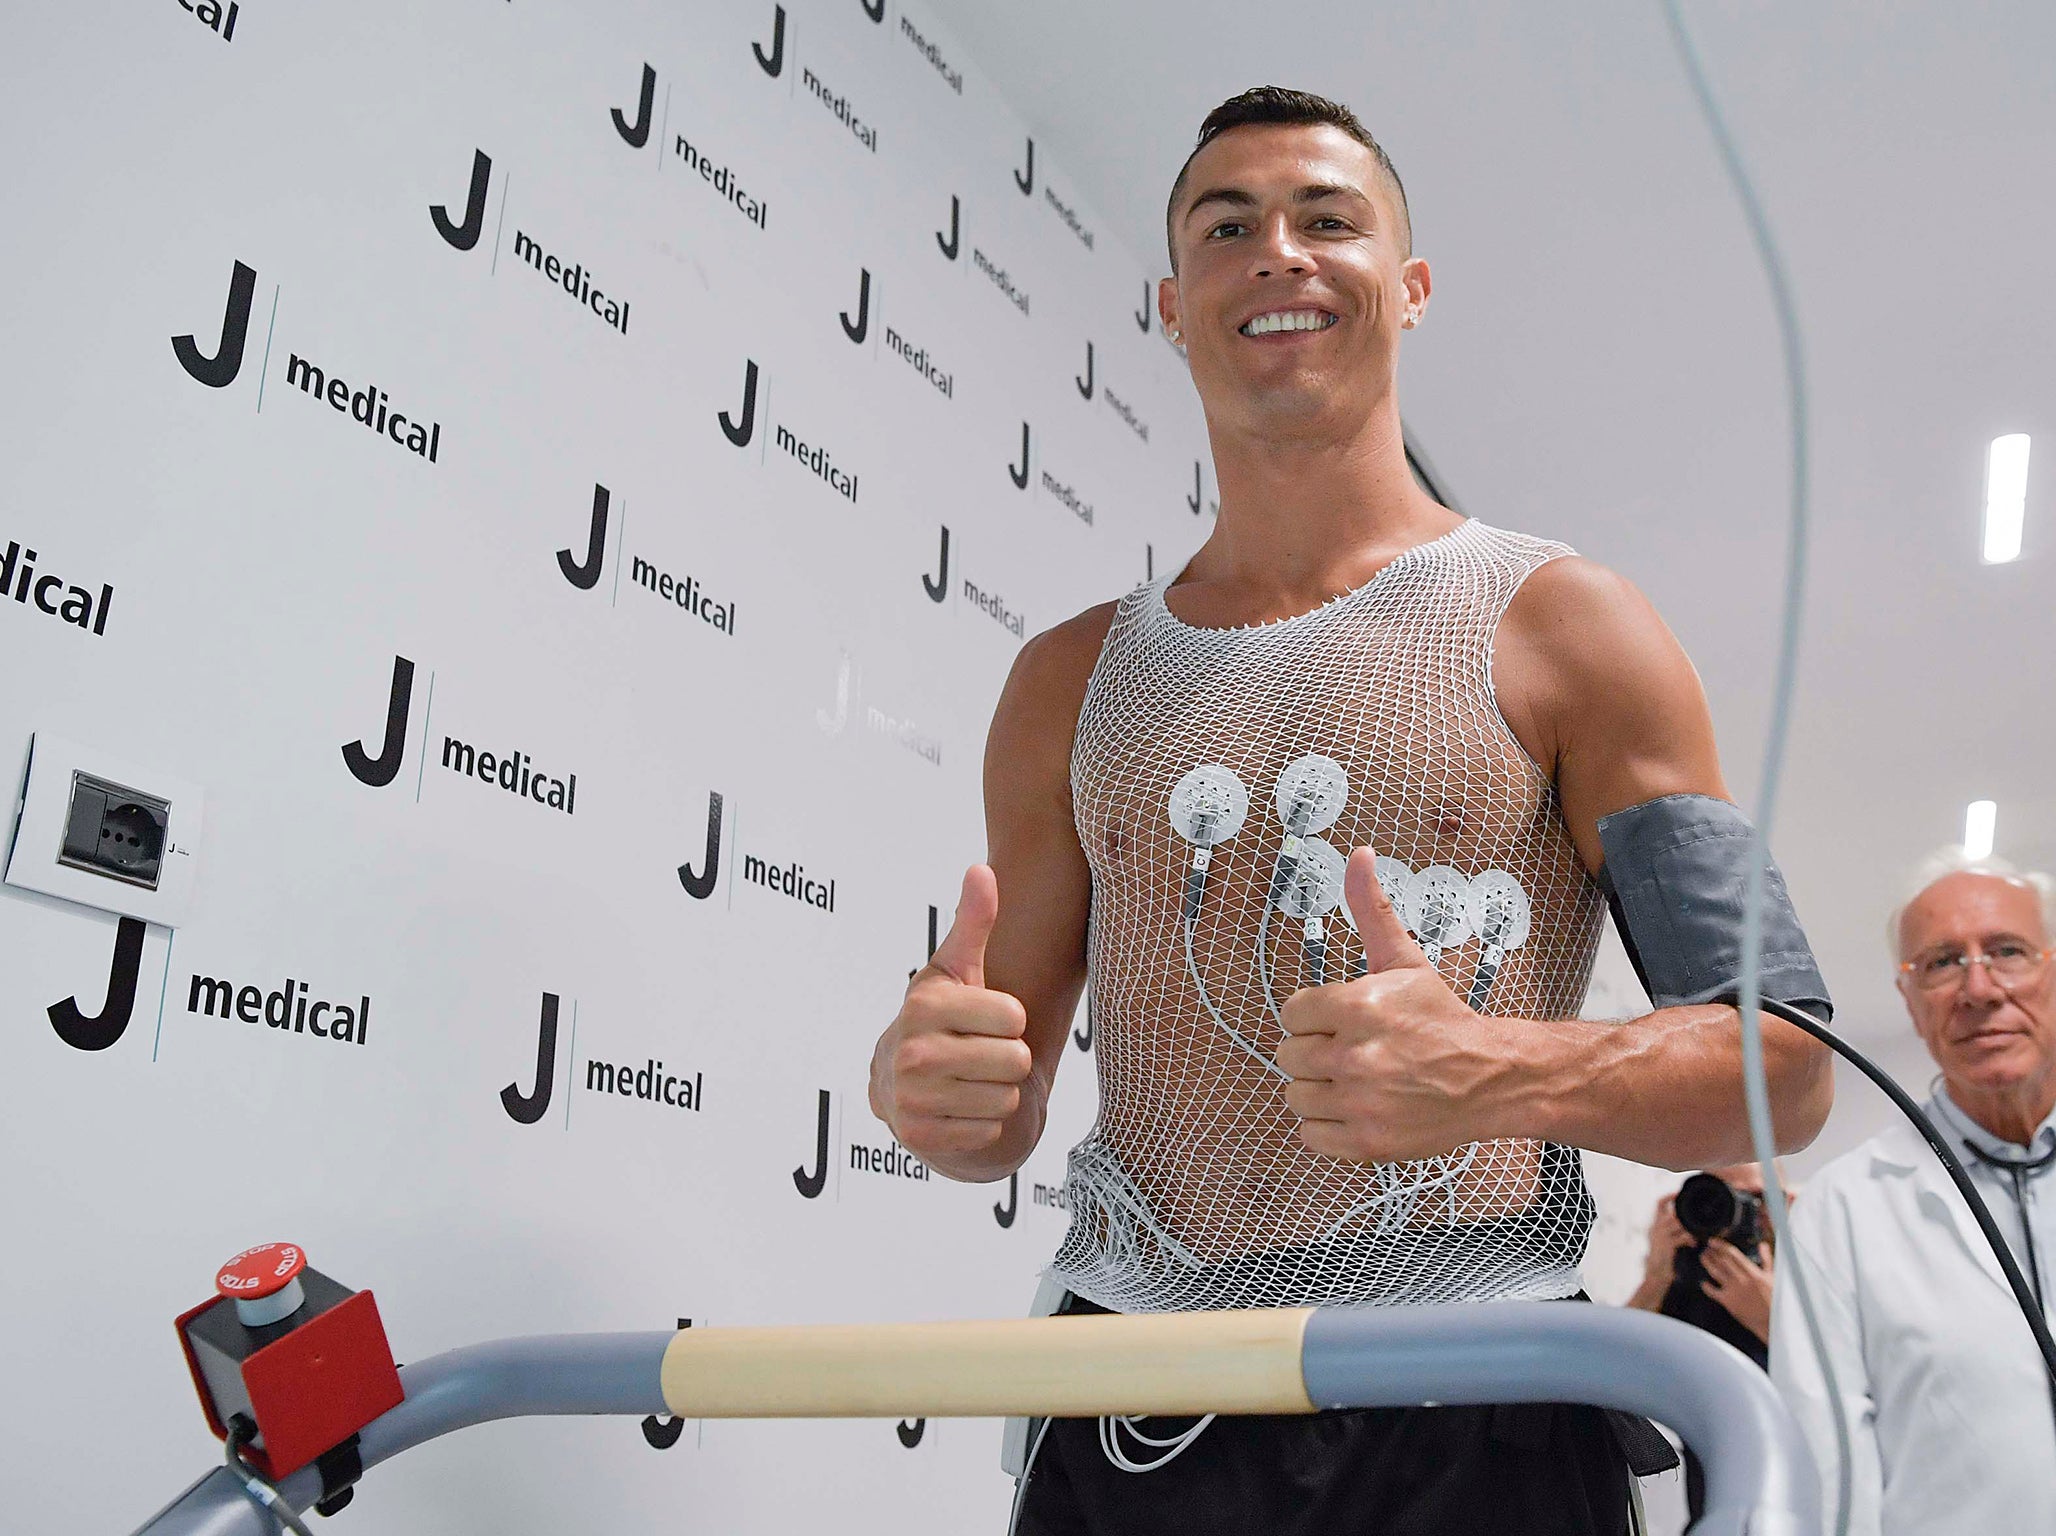 Cristiano Ronaldo Juventus medical: The facts and figures that show CR7 has physical capability of a 20-year-old